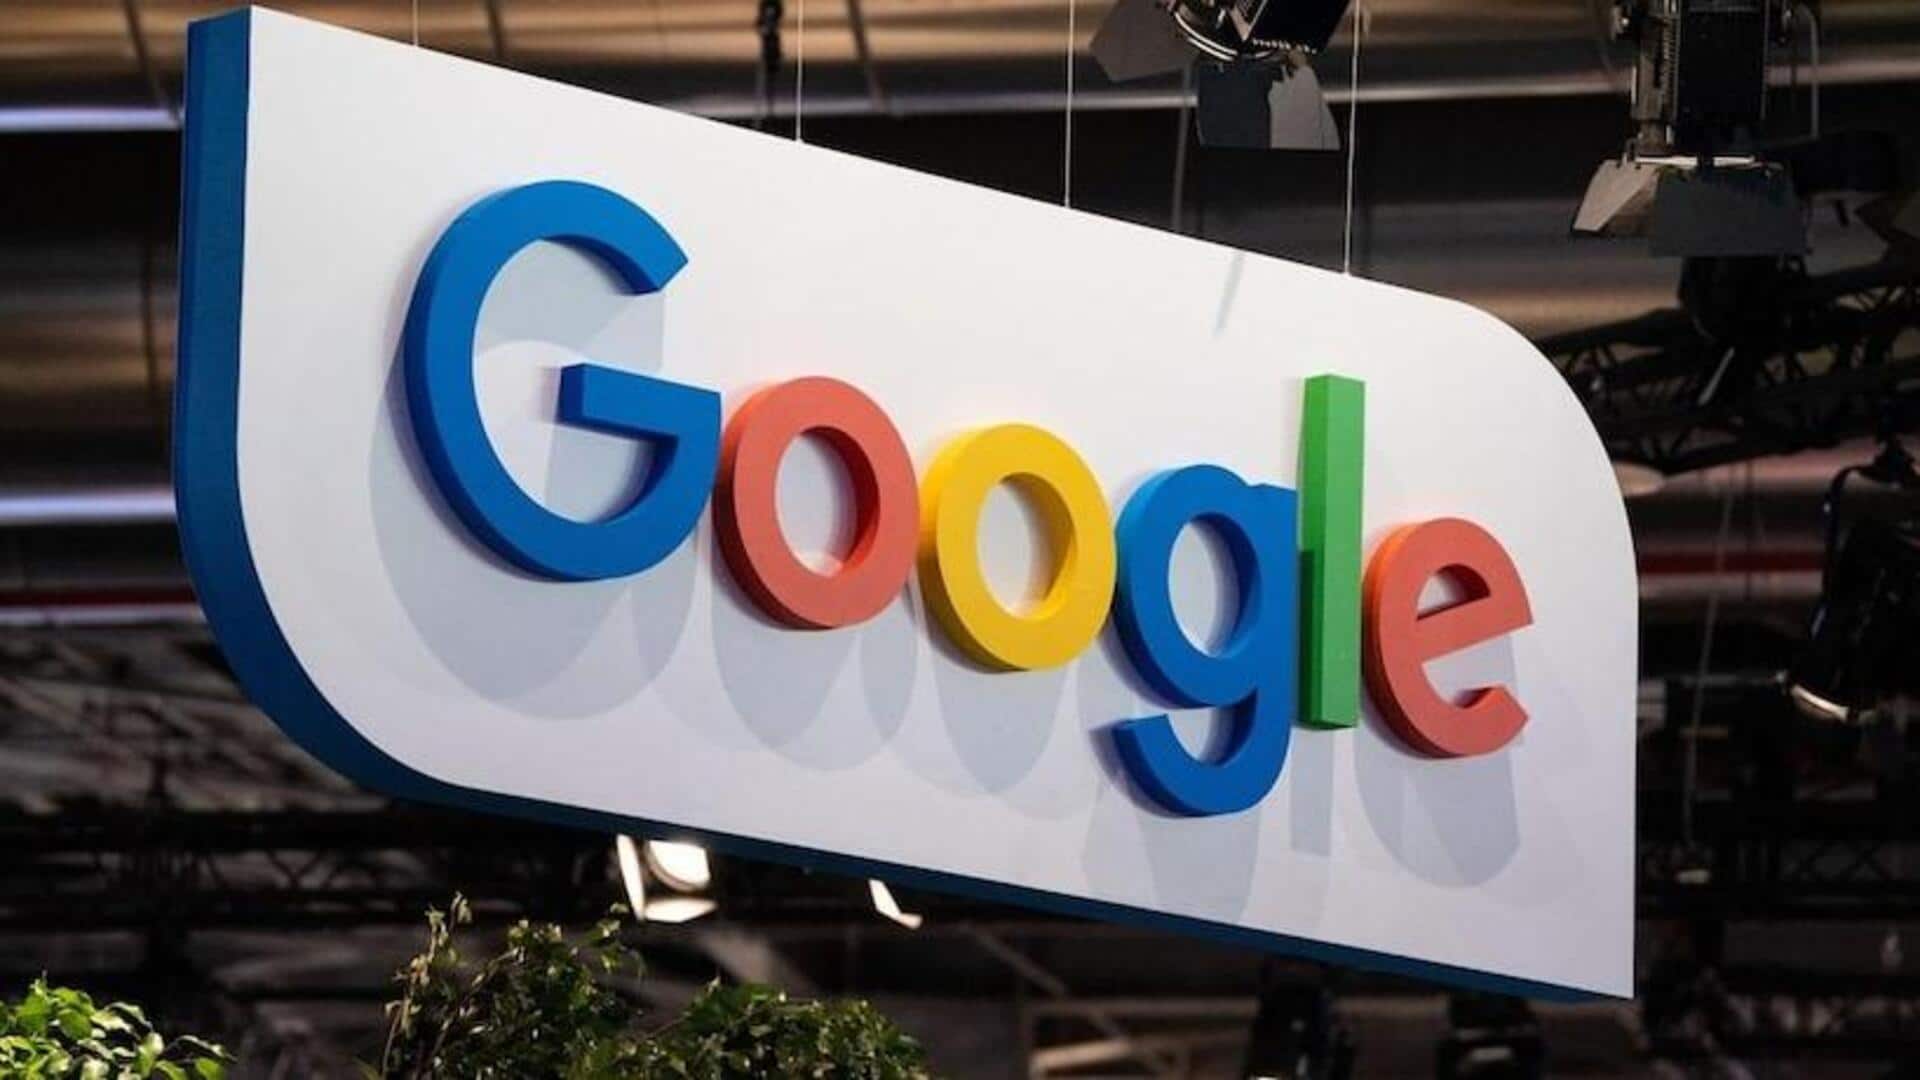 Google fined Rs. 1.36cr for violating Russian data storage laws